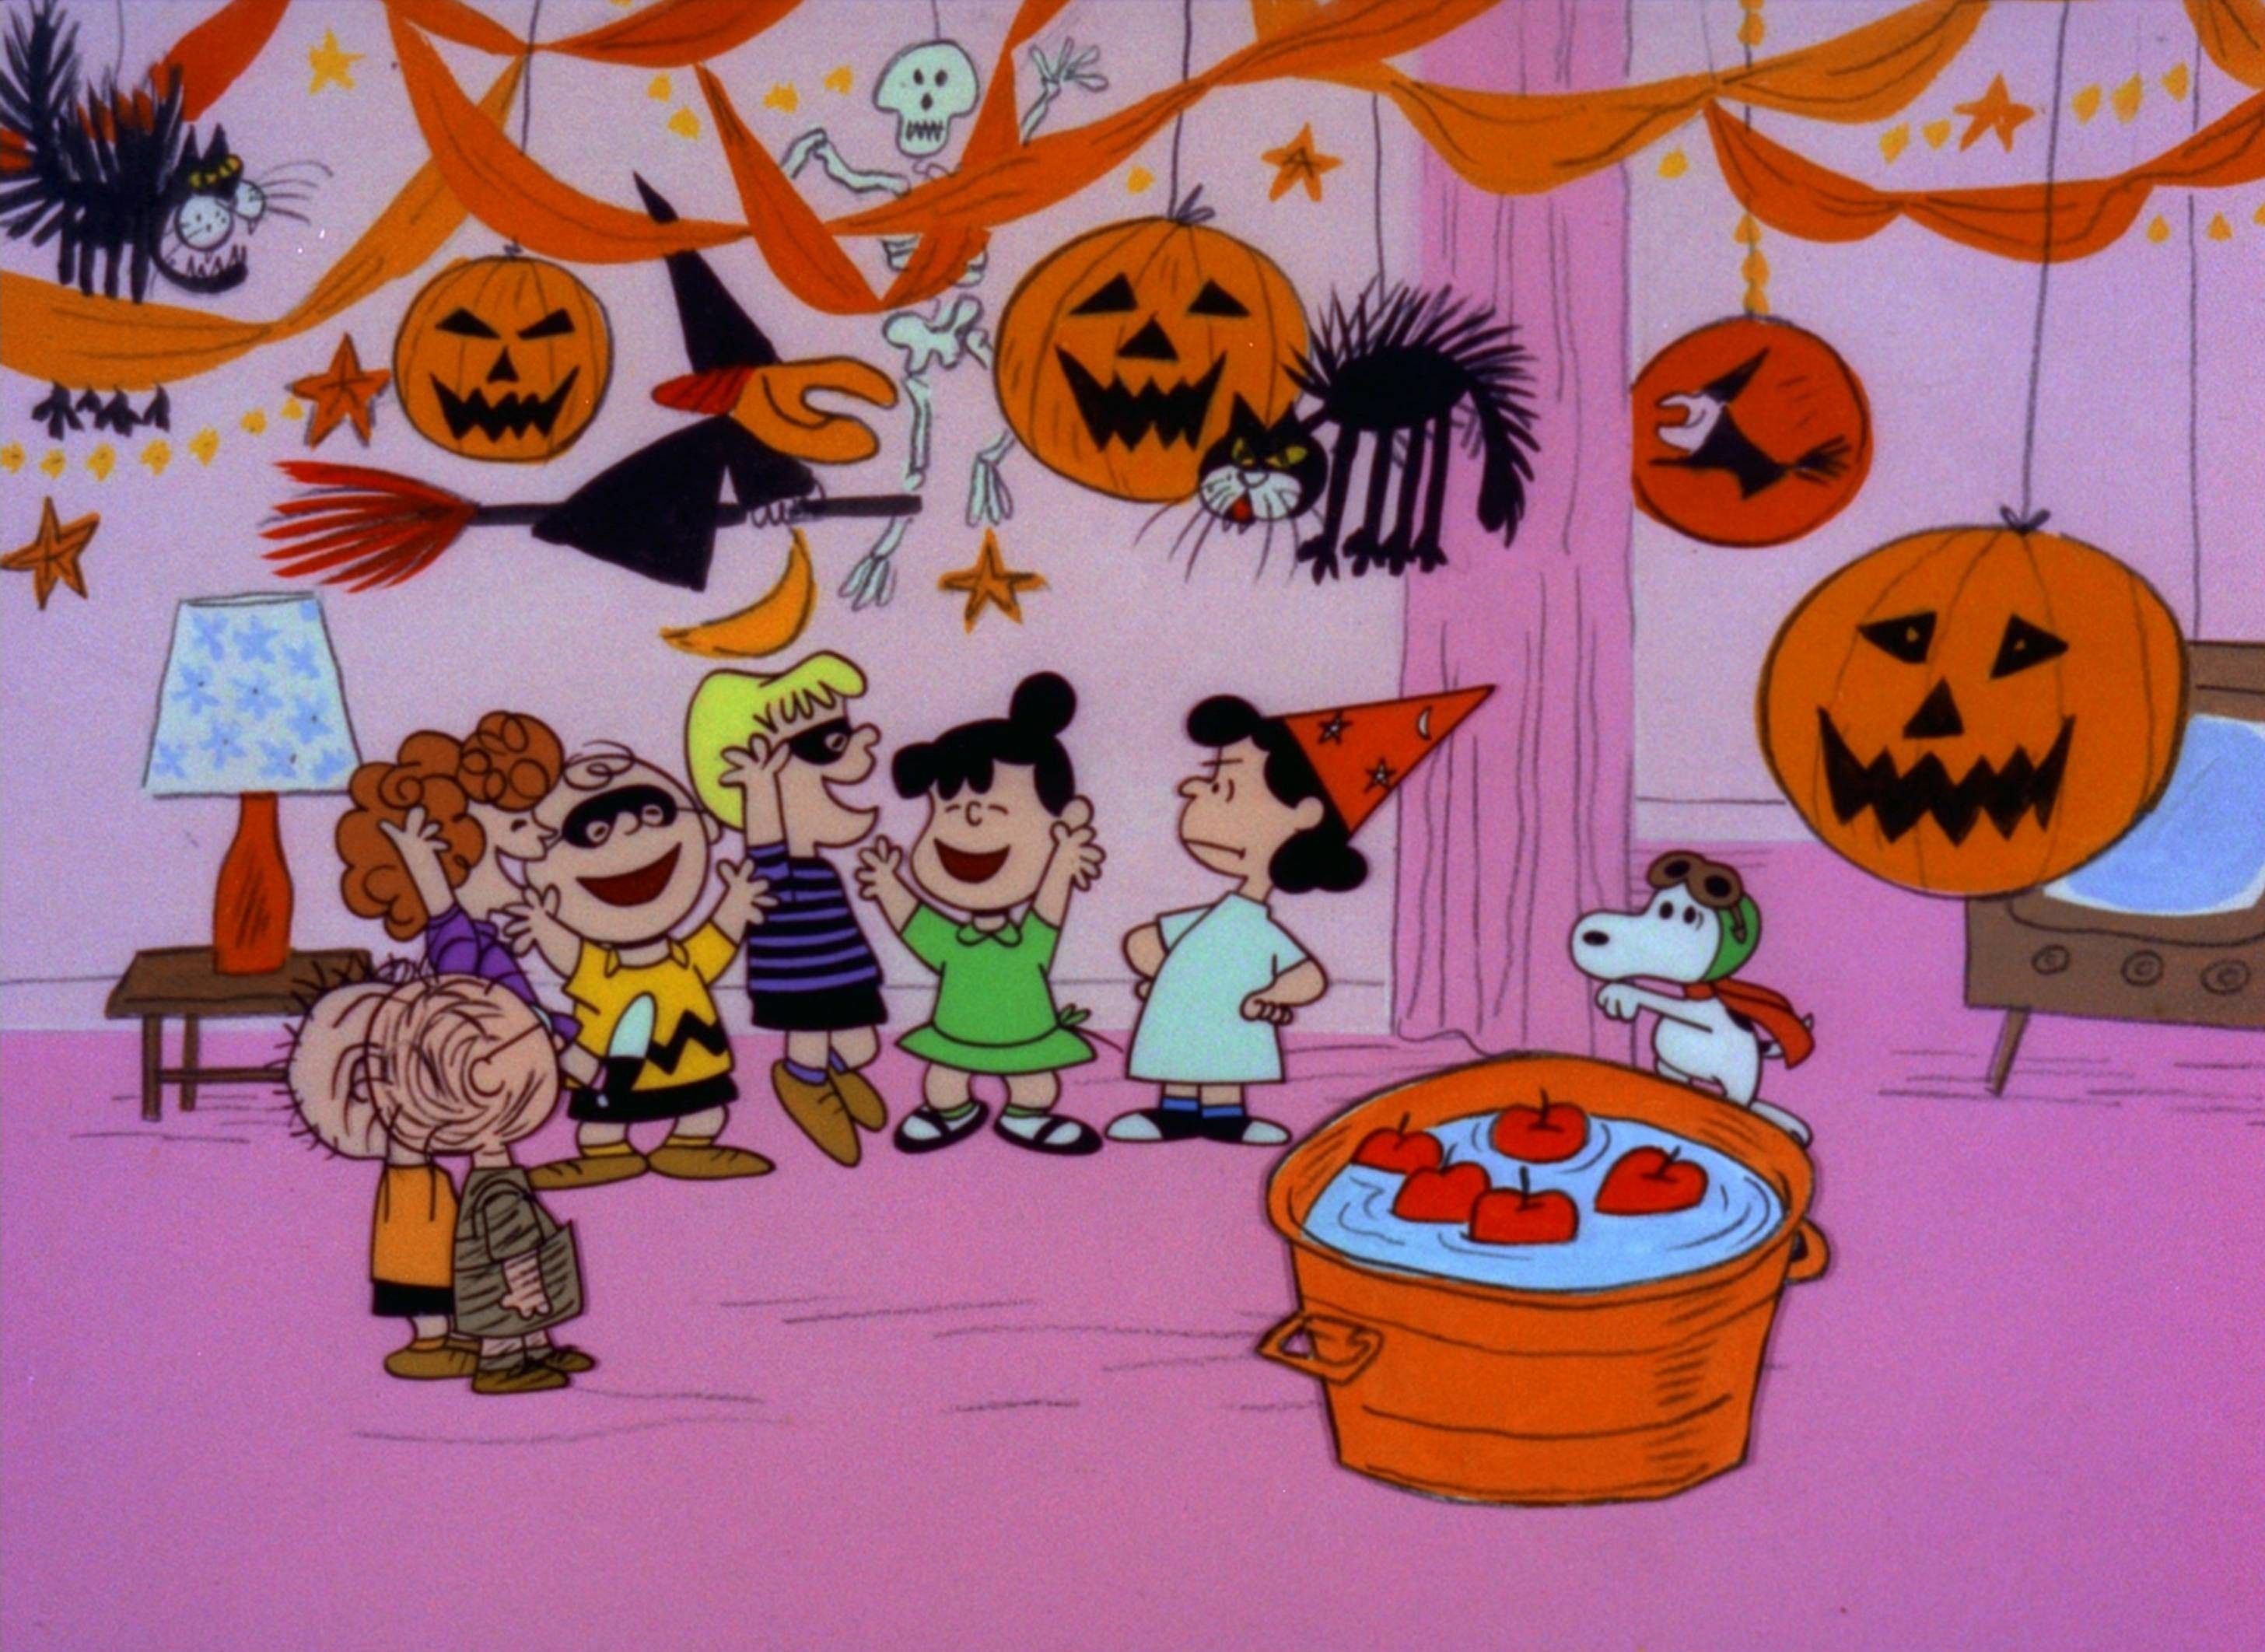 A cartoon of some children in halloween costumes - Snoopy, Halloween